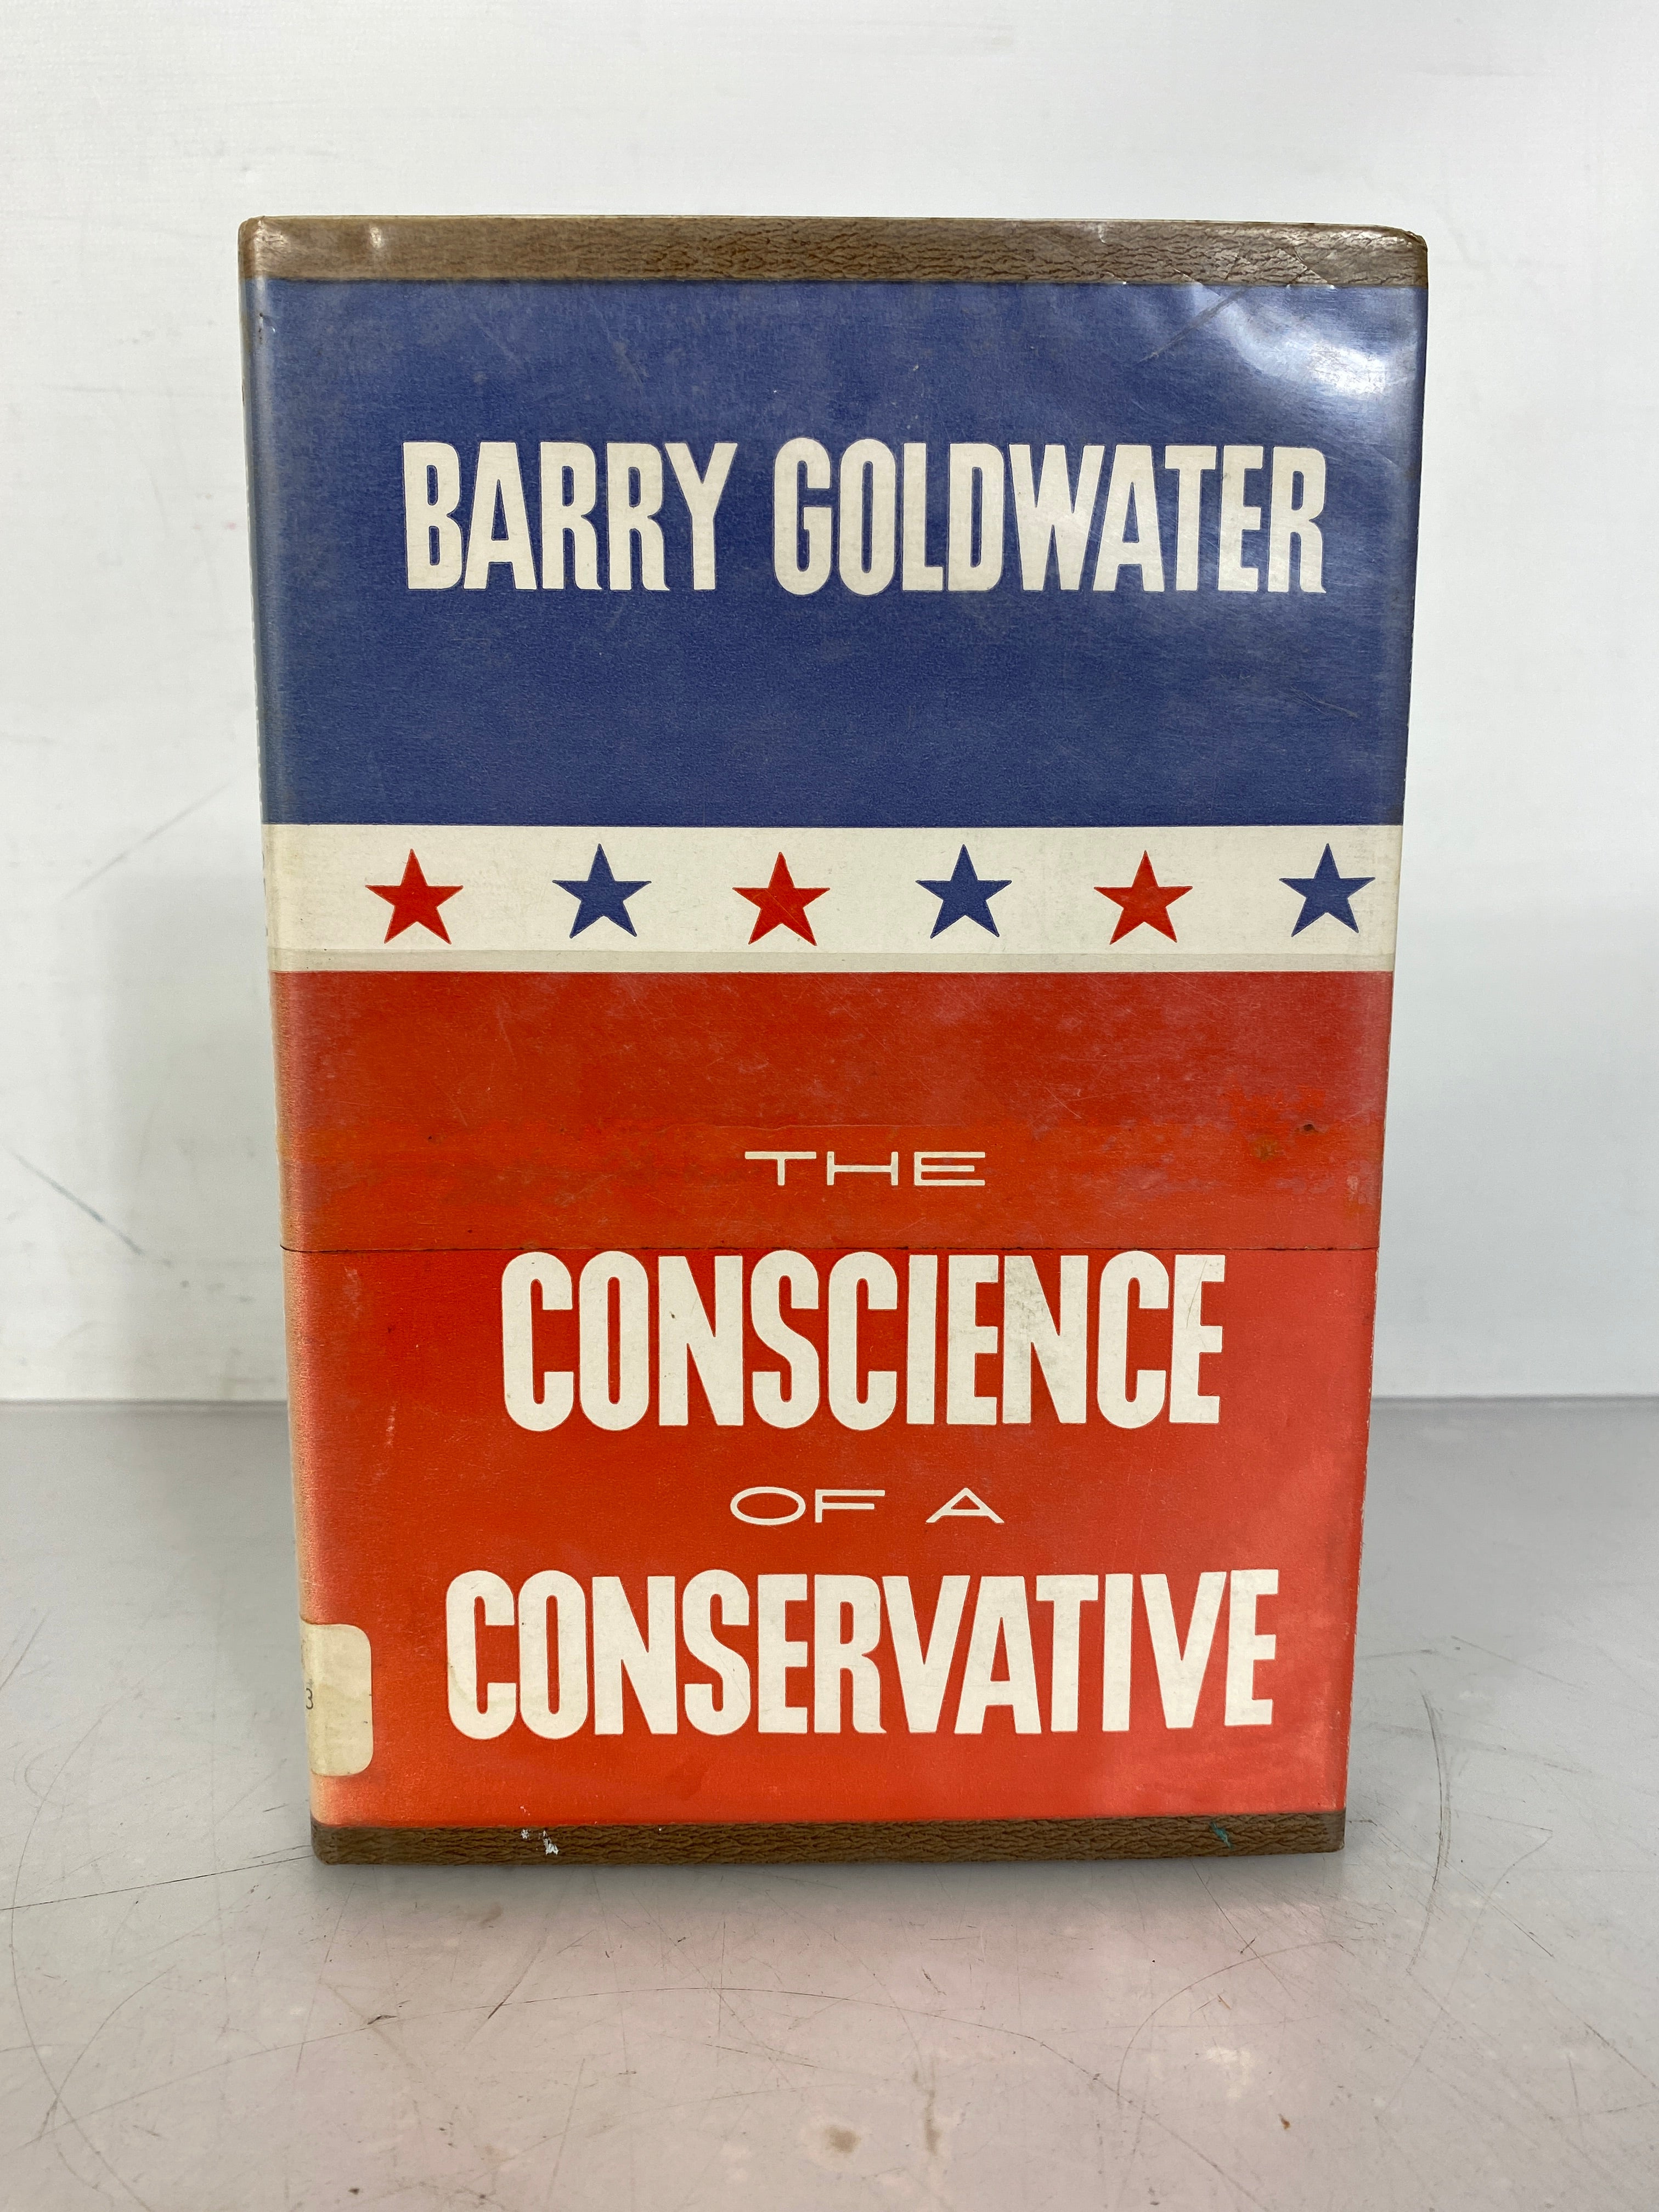 Vintage Barry Goldwater The Conscience of a Conservative First Edition Sixth Printing 1961 HC DJ